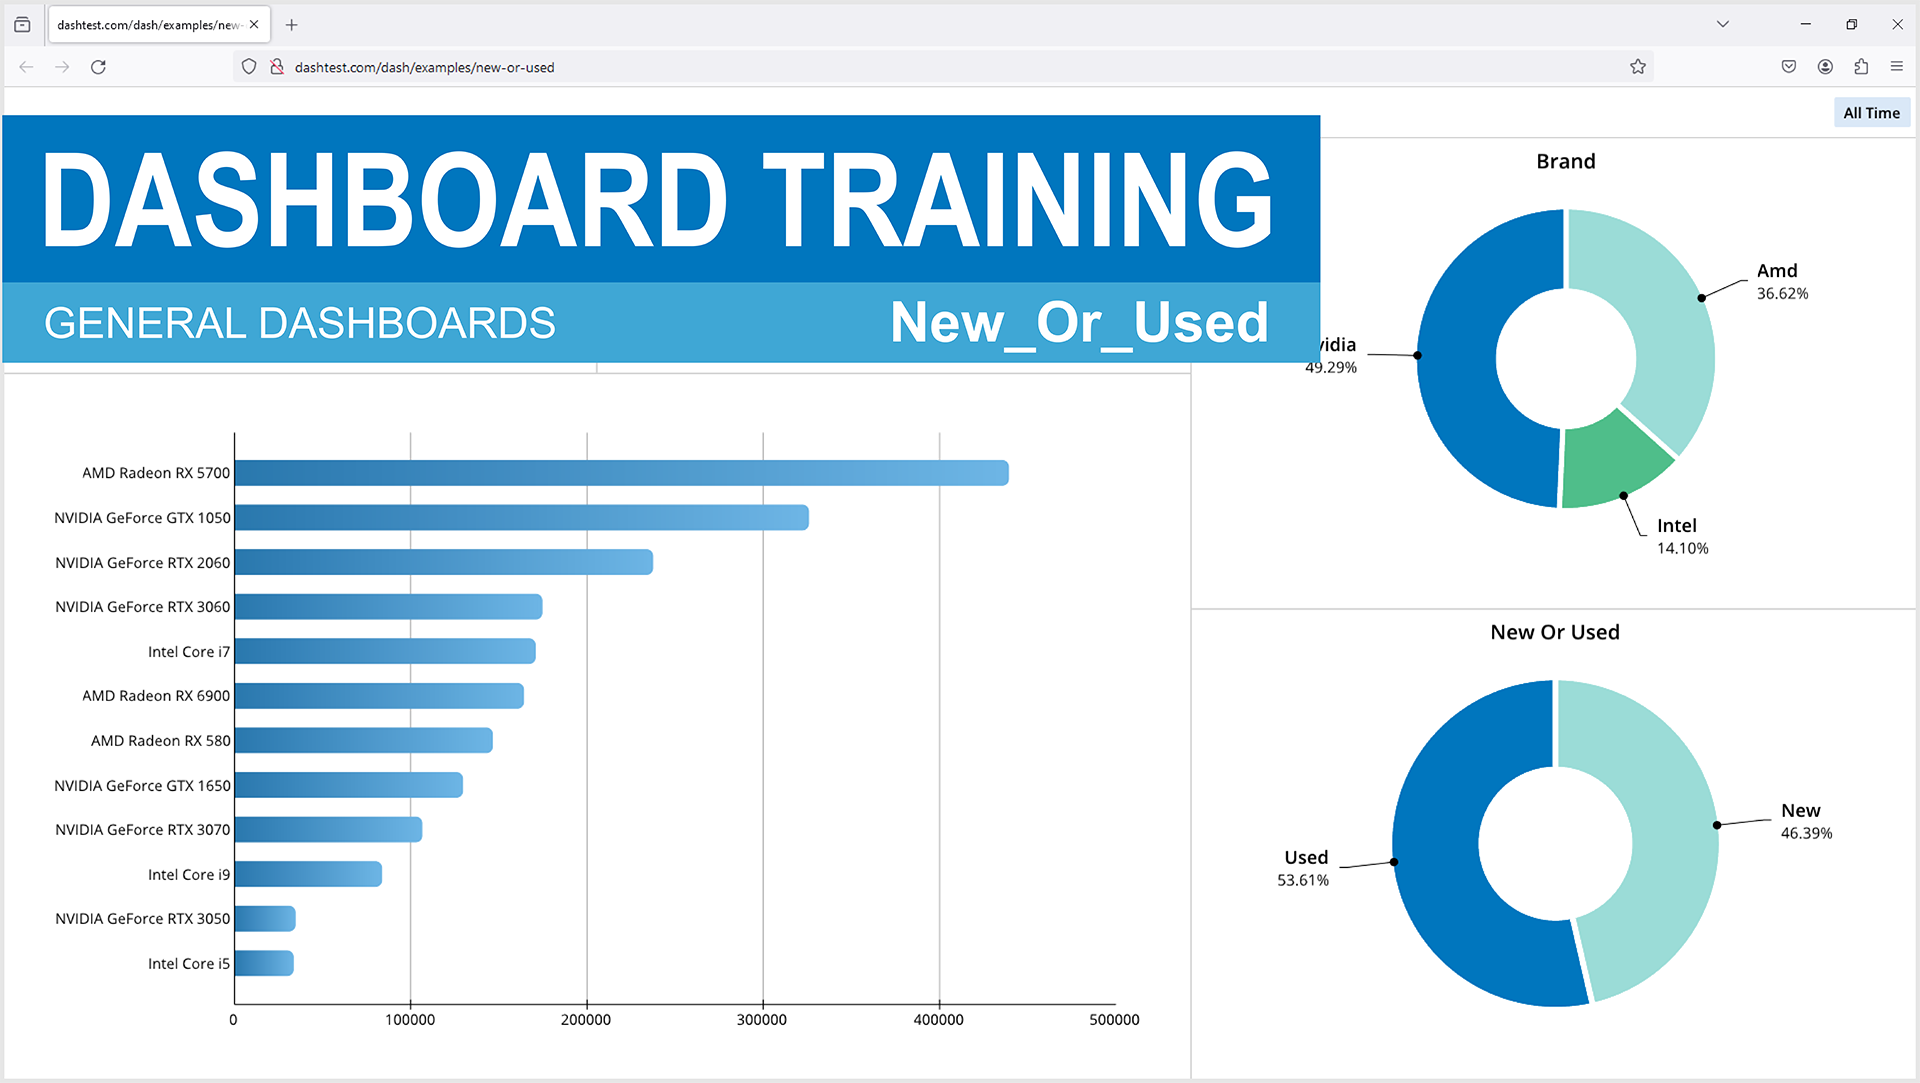 A graphic illustration of a dashboard training program, showcasing various statistics and data.